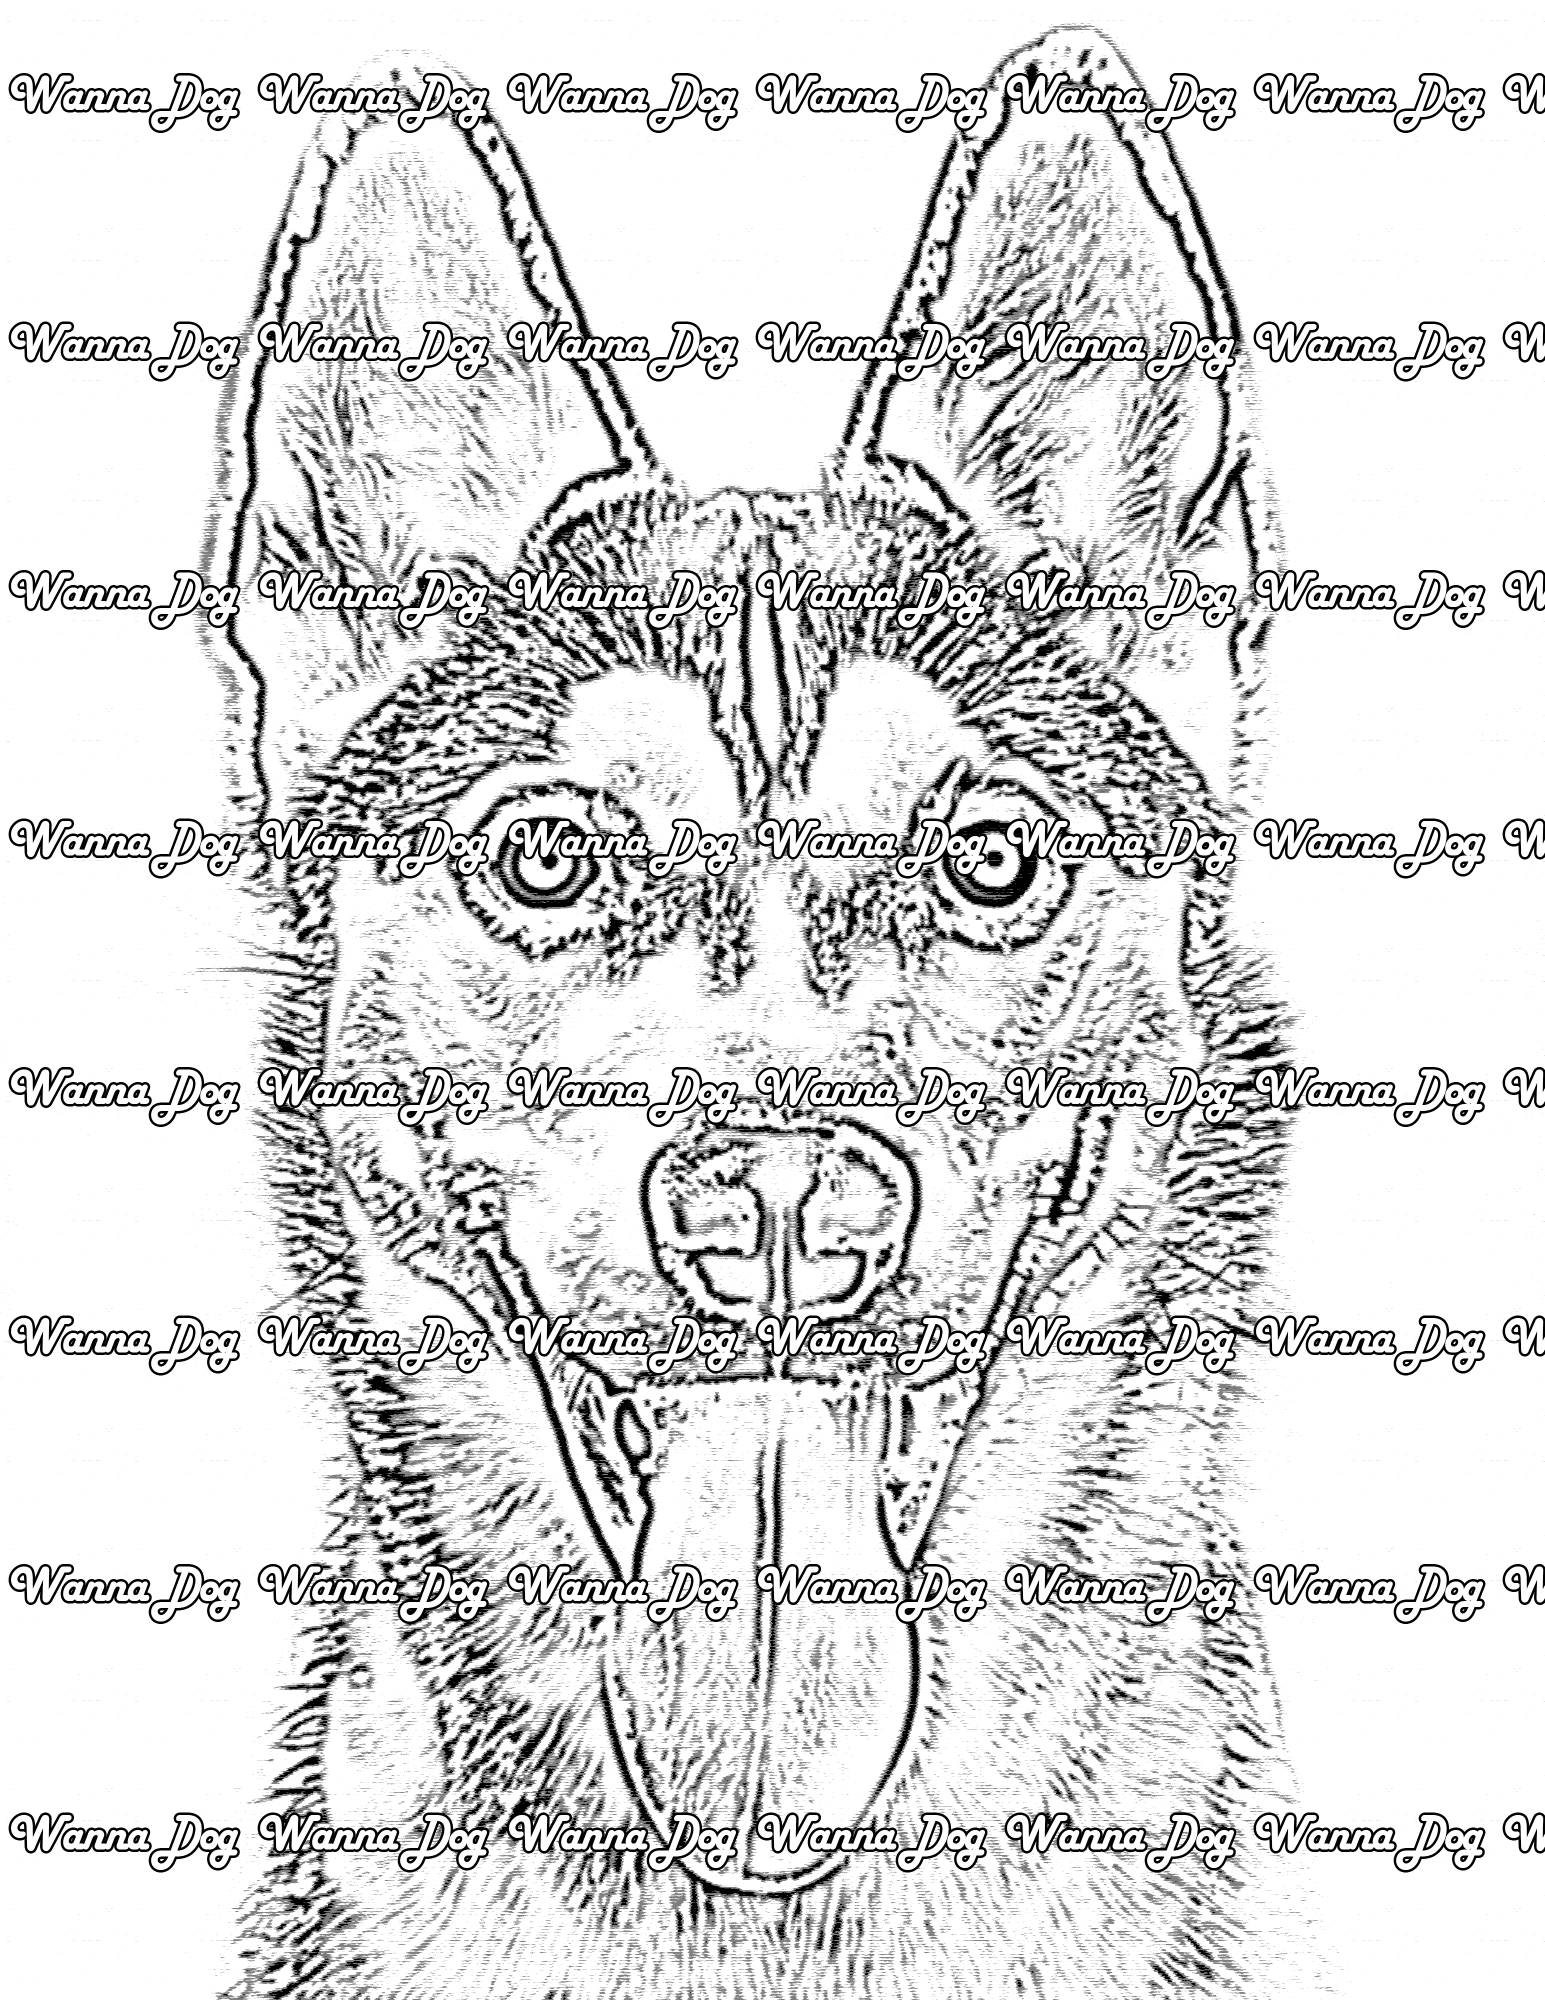 Siberian Husky Coloring Page of a Siberian Husky close up with their tongue out